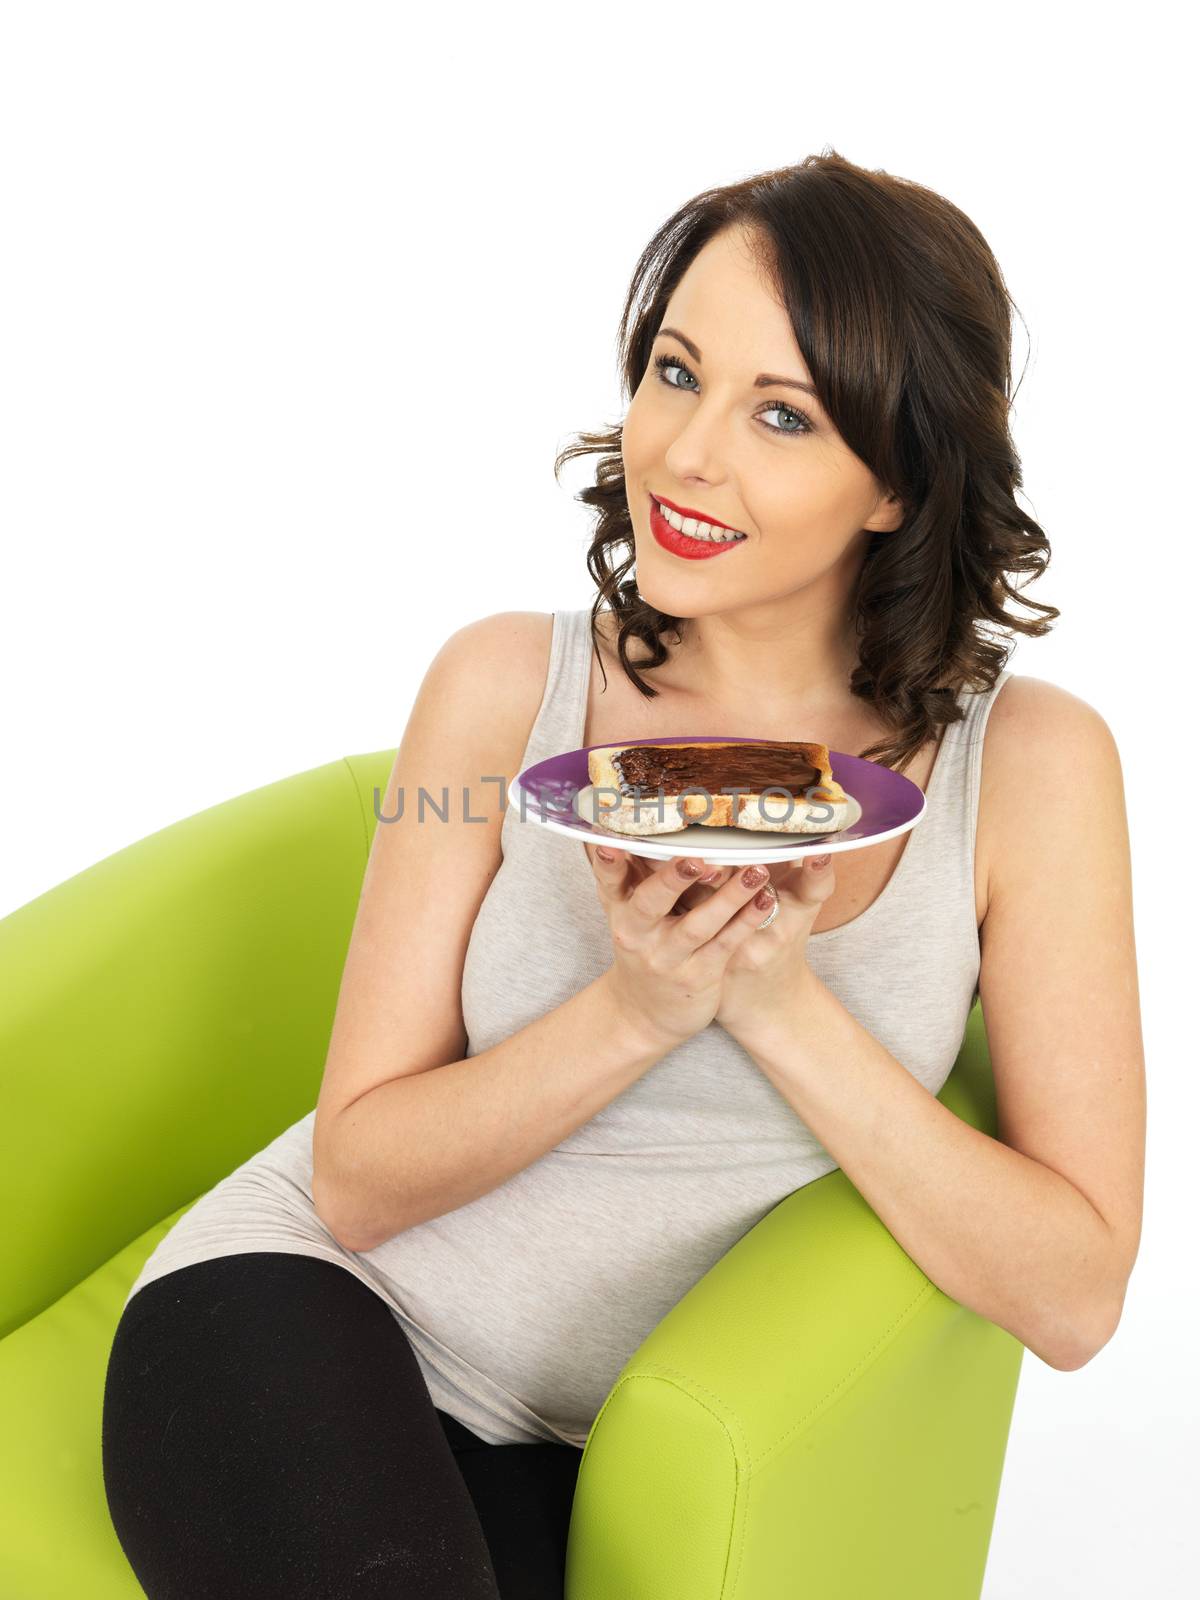 Young Woman Holding Toast Spread with Yeast Extract by Whiteboxmedia